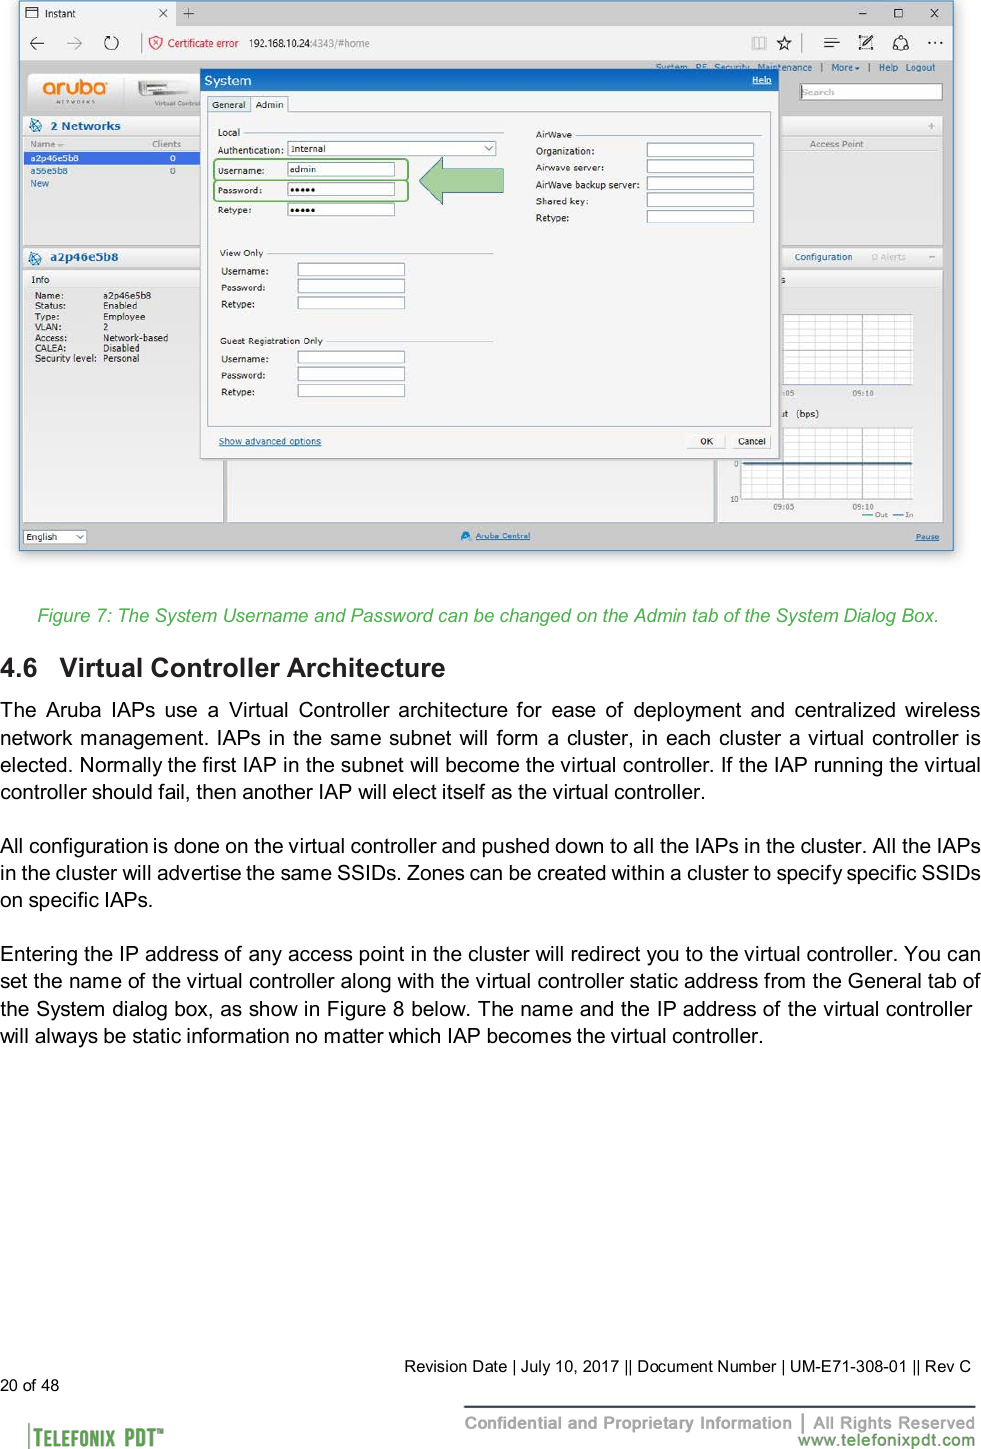                               Figure 7: The System Username and Password can be changed on the Admin tab of the System Dialog Box.  4.6   Virtual Controller Architecture  The  Aruba  IAPs  use  a  Virtual  Controller  architecture  for ease  of  deployment  and  centralized wireless network management. IAPs in the same subnet will form a cluster, in each cluster a virtual controller is elected. Normally the first IAP in the subnet will become the virtual controller. If the IAP running the virtual controller should fail, then another IAP will elect itself as the virtual controller.  All configuration is done on the virtual controller and pushed down to all the IAPs in the cluster. All the IAPs in the cluster will advertise the same SSIDs. Zones can be created within a cluster to specify specific SSIDs on specific IAPs.  Entering the IP address of any access point in the cluster will redirect you to the virtual controller. You can set the name of the virtual controller along with the virtual controller static address from the General tab of the System dialog box, as show in Figure 8 below. The name and the IP address of the virtual controller will always be static information no matter which IAP becomes the virtual controller.                 20 of 48 Revision Date | July 10, 2017 || Document Number | UM-E71-308-01 || Rev C 